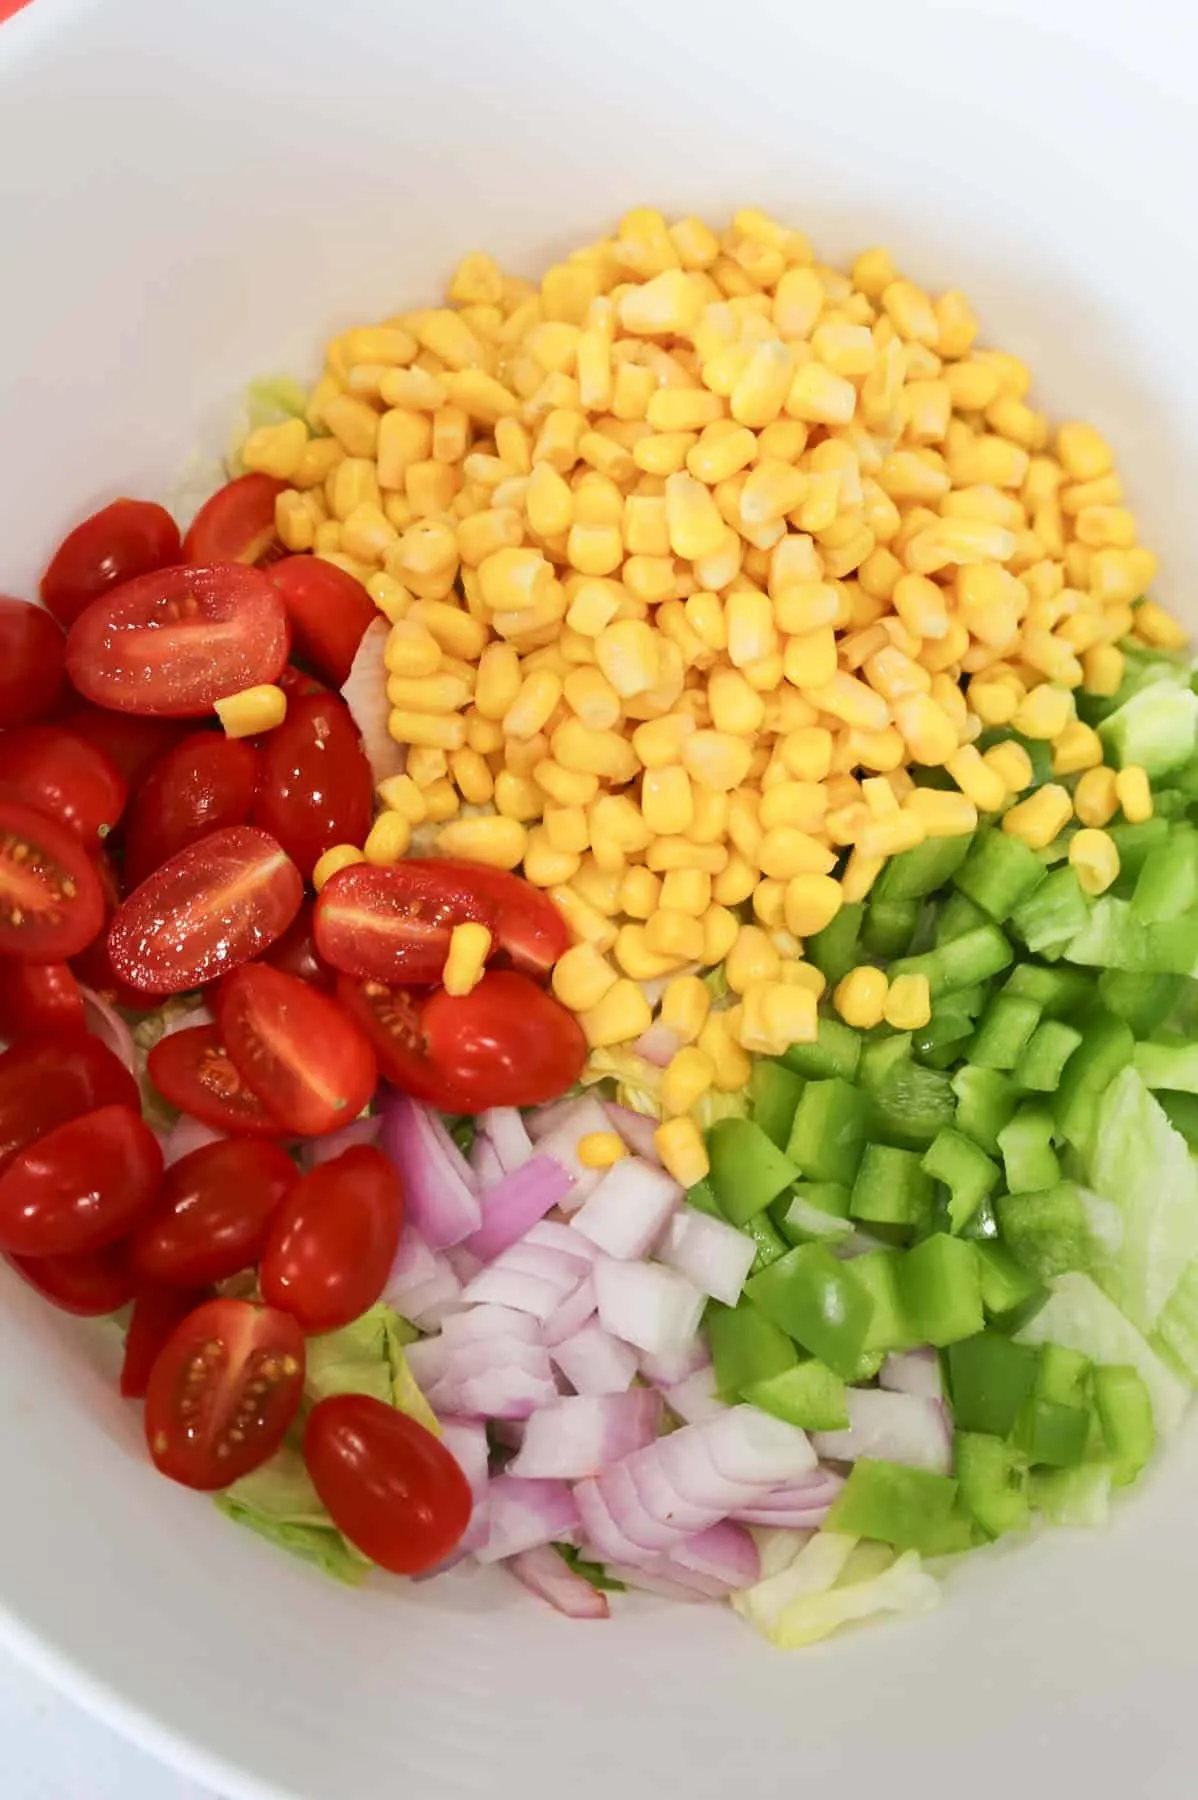 halved grape tomatoes, corn, diced green peppers and red onions on top of iceberg lettuce in a bowl